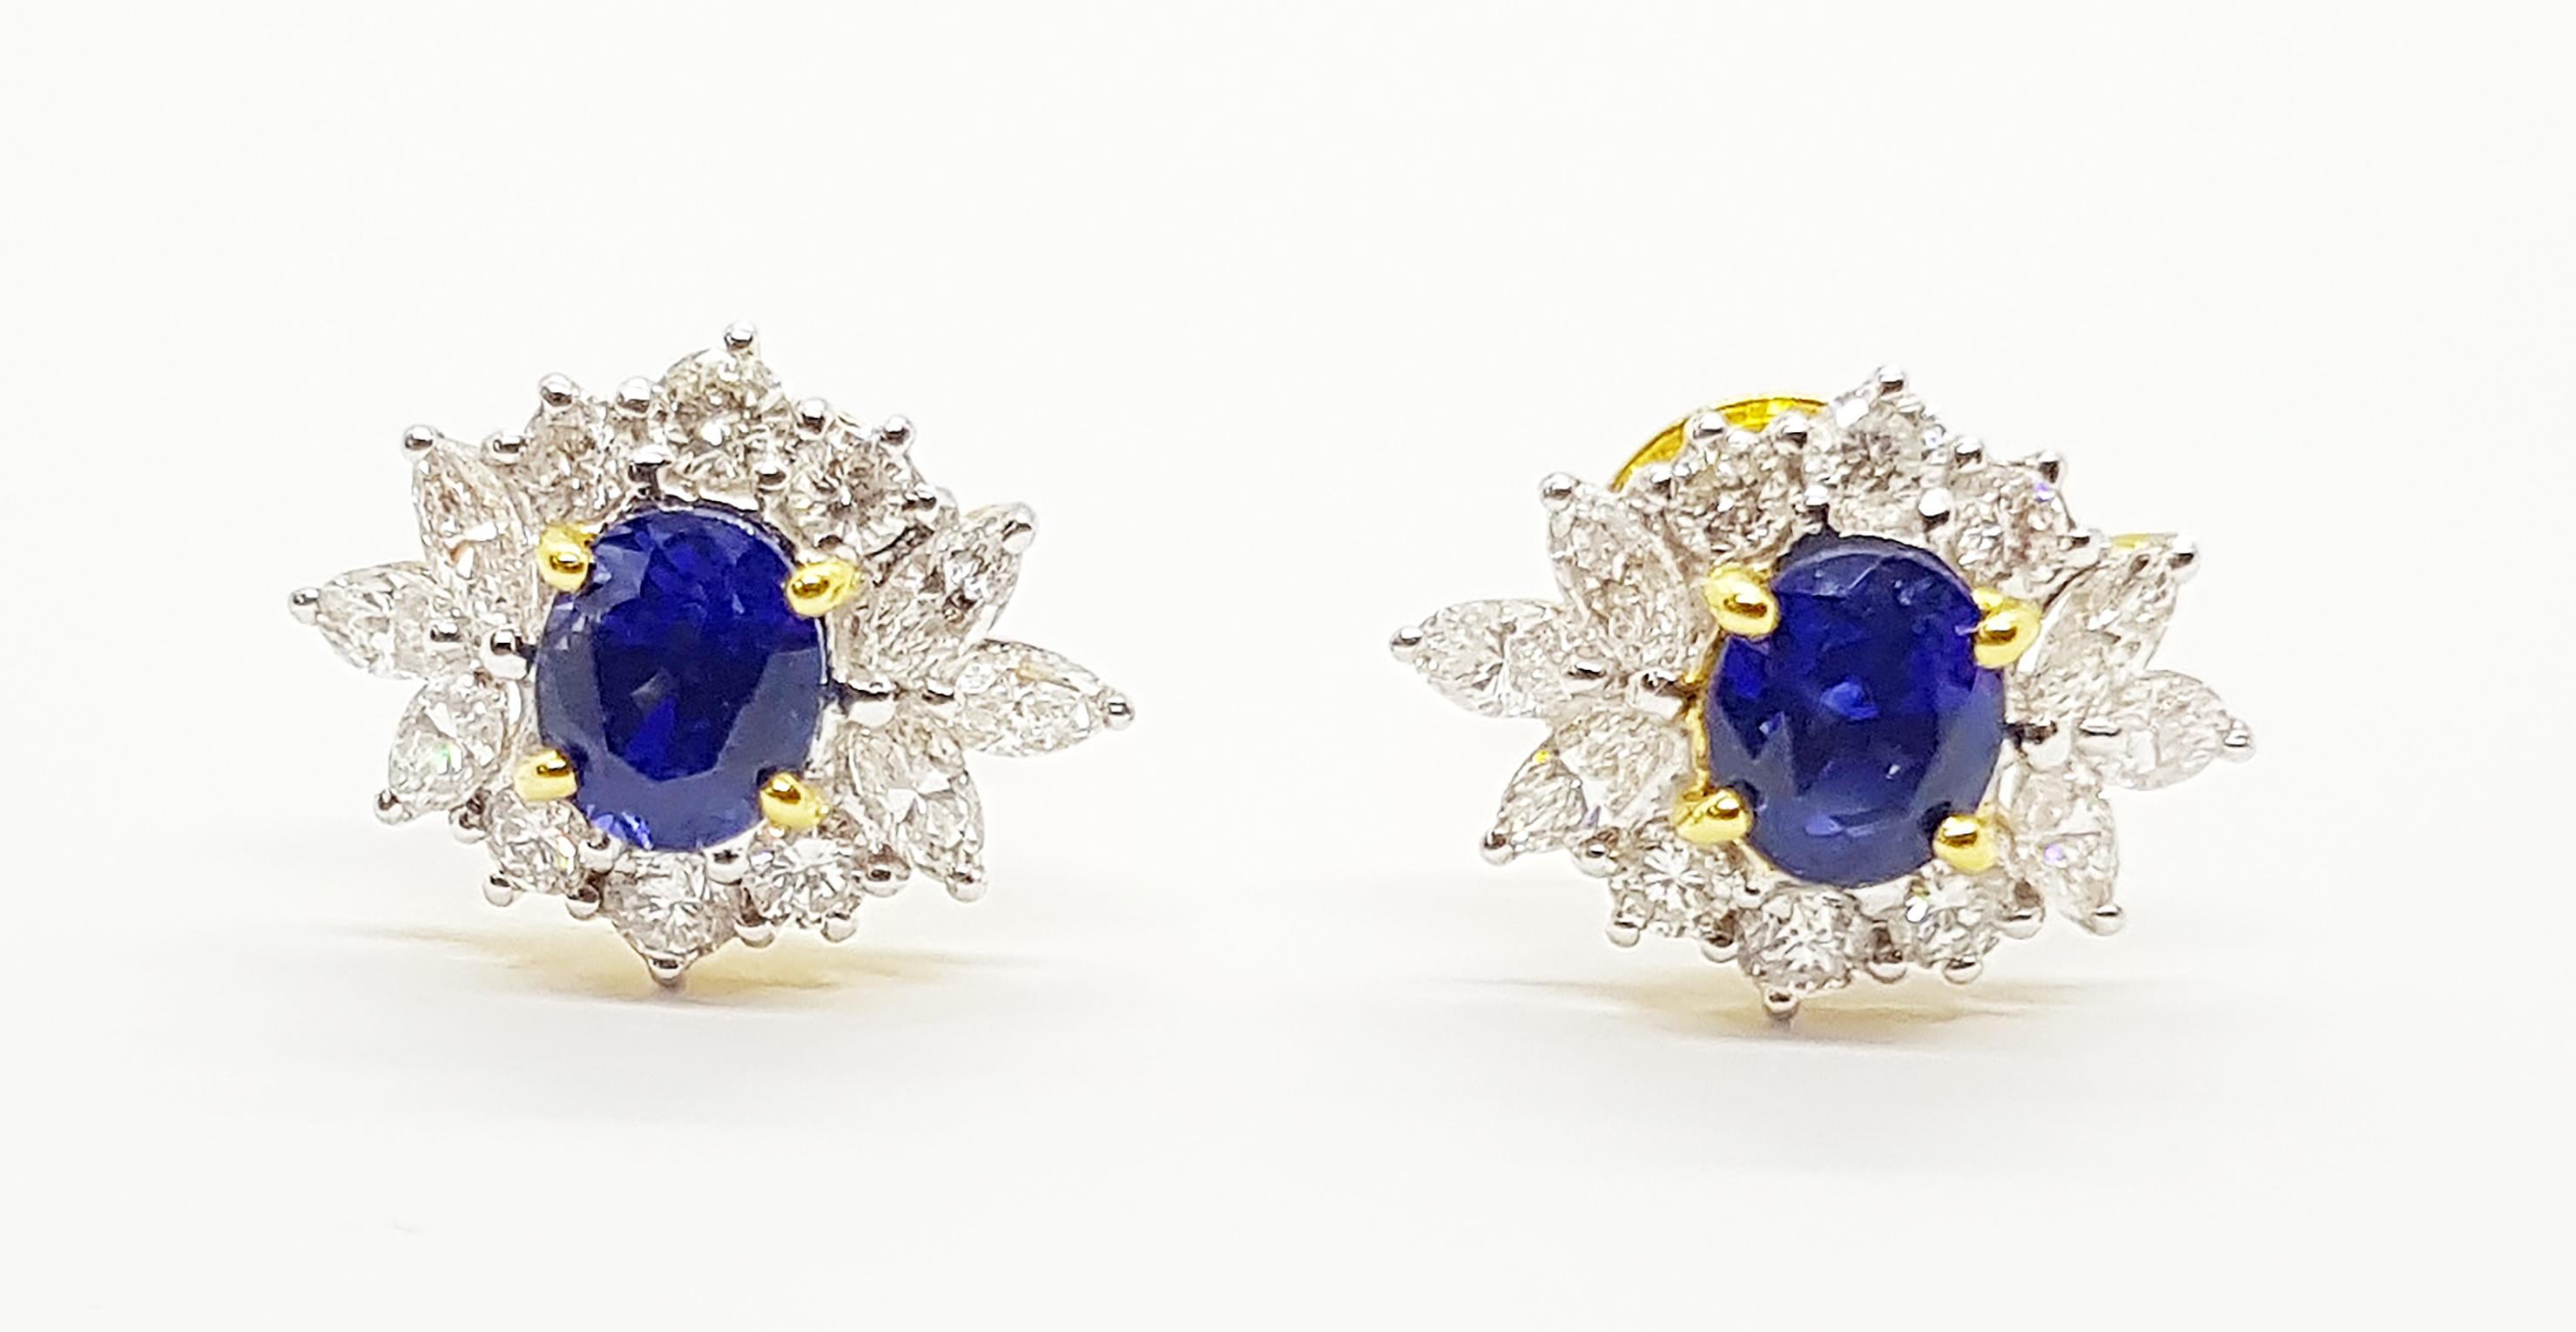 Blue Sapphire 2.75 carats with Diamond 1.8 carats Earrings set in 18 Karat Gold Settings

Width:  1.3 cm 
Length: 1.7 cm
Total Weight: 6.95 grams

